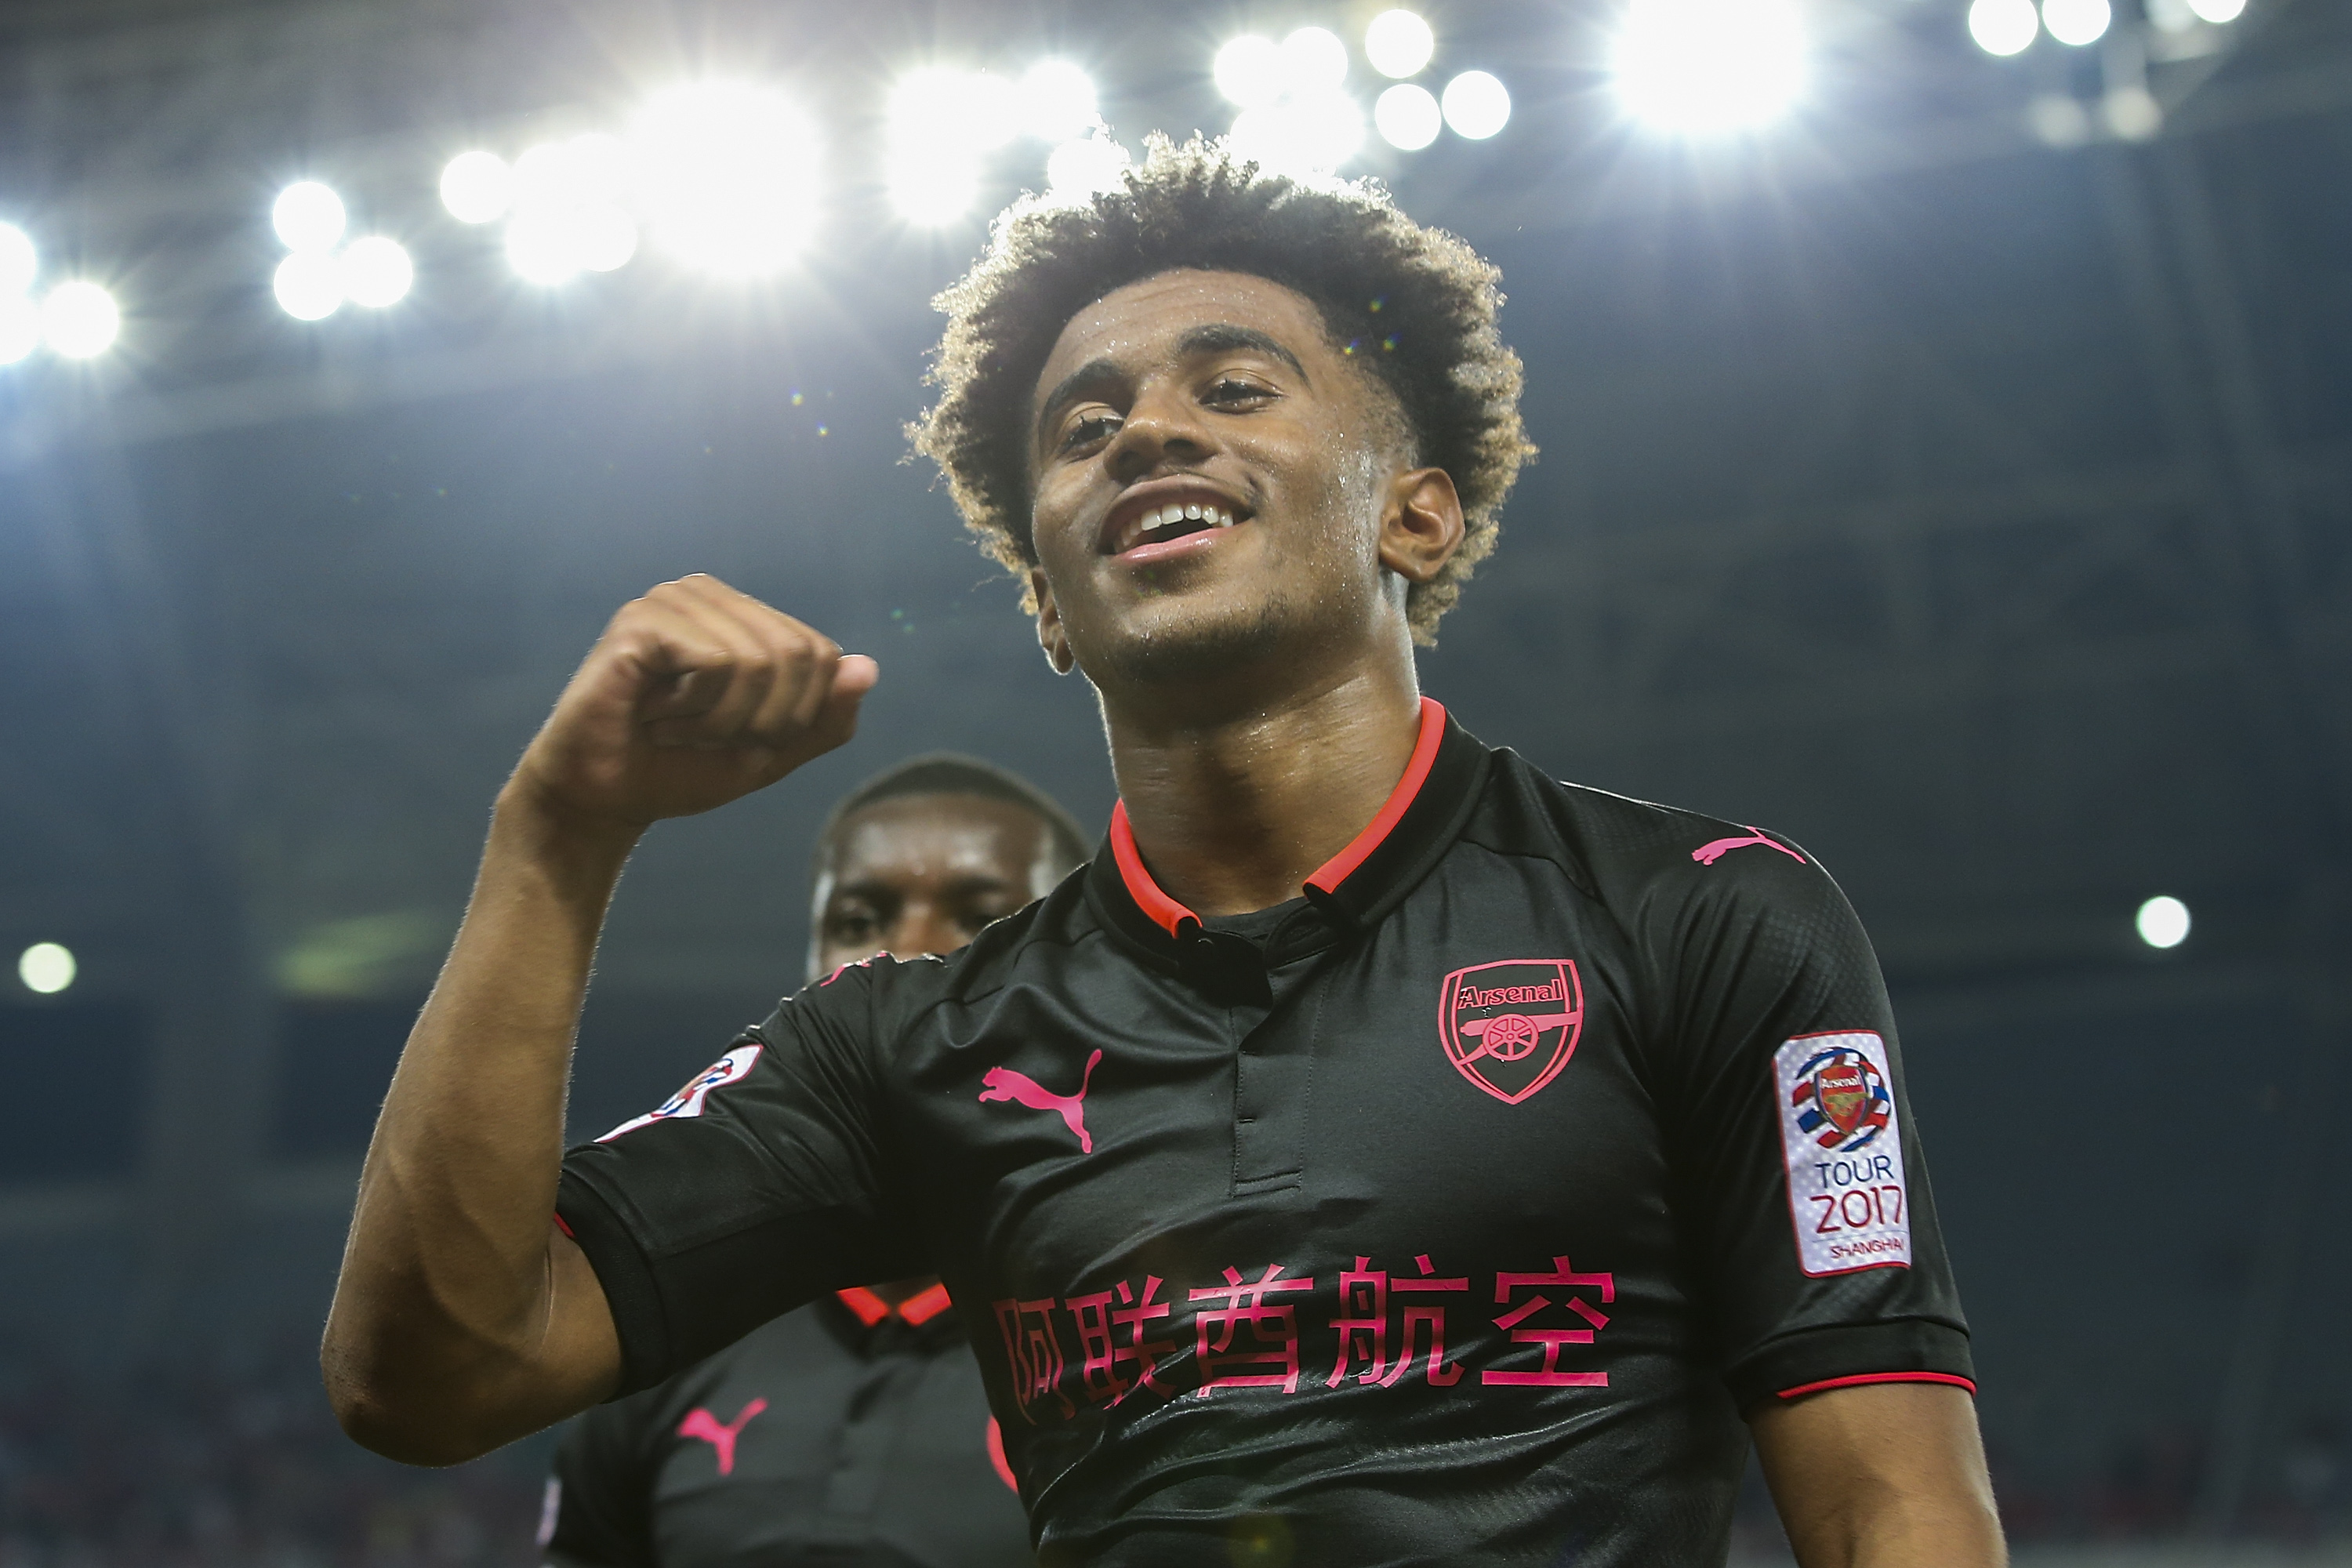 SHANGHAI, CHINA - JULY 19:  Reiss Nelson of Arsenal FC celebrates after win the 2017 International Champions Cup football match between FC Bayern and Arsenal FC at Shanghai Stadium on July 19, 2017 in Shanghai, China.  (Photo by Lintao Zhang/Getty Images)